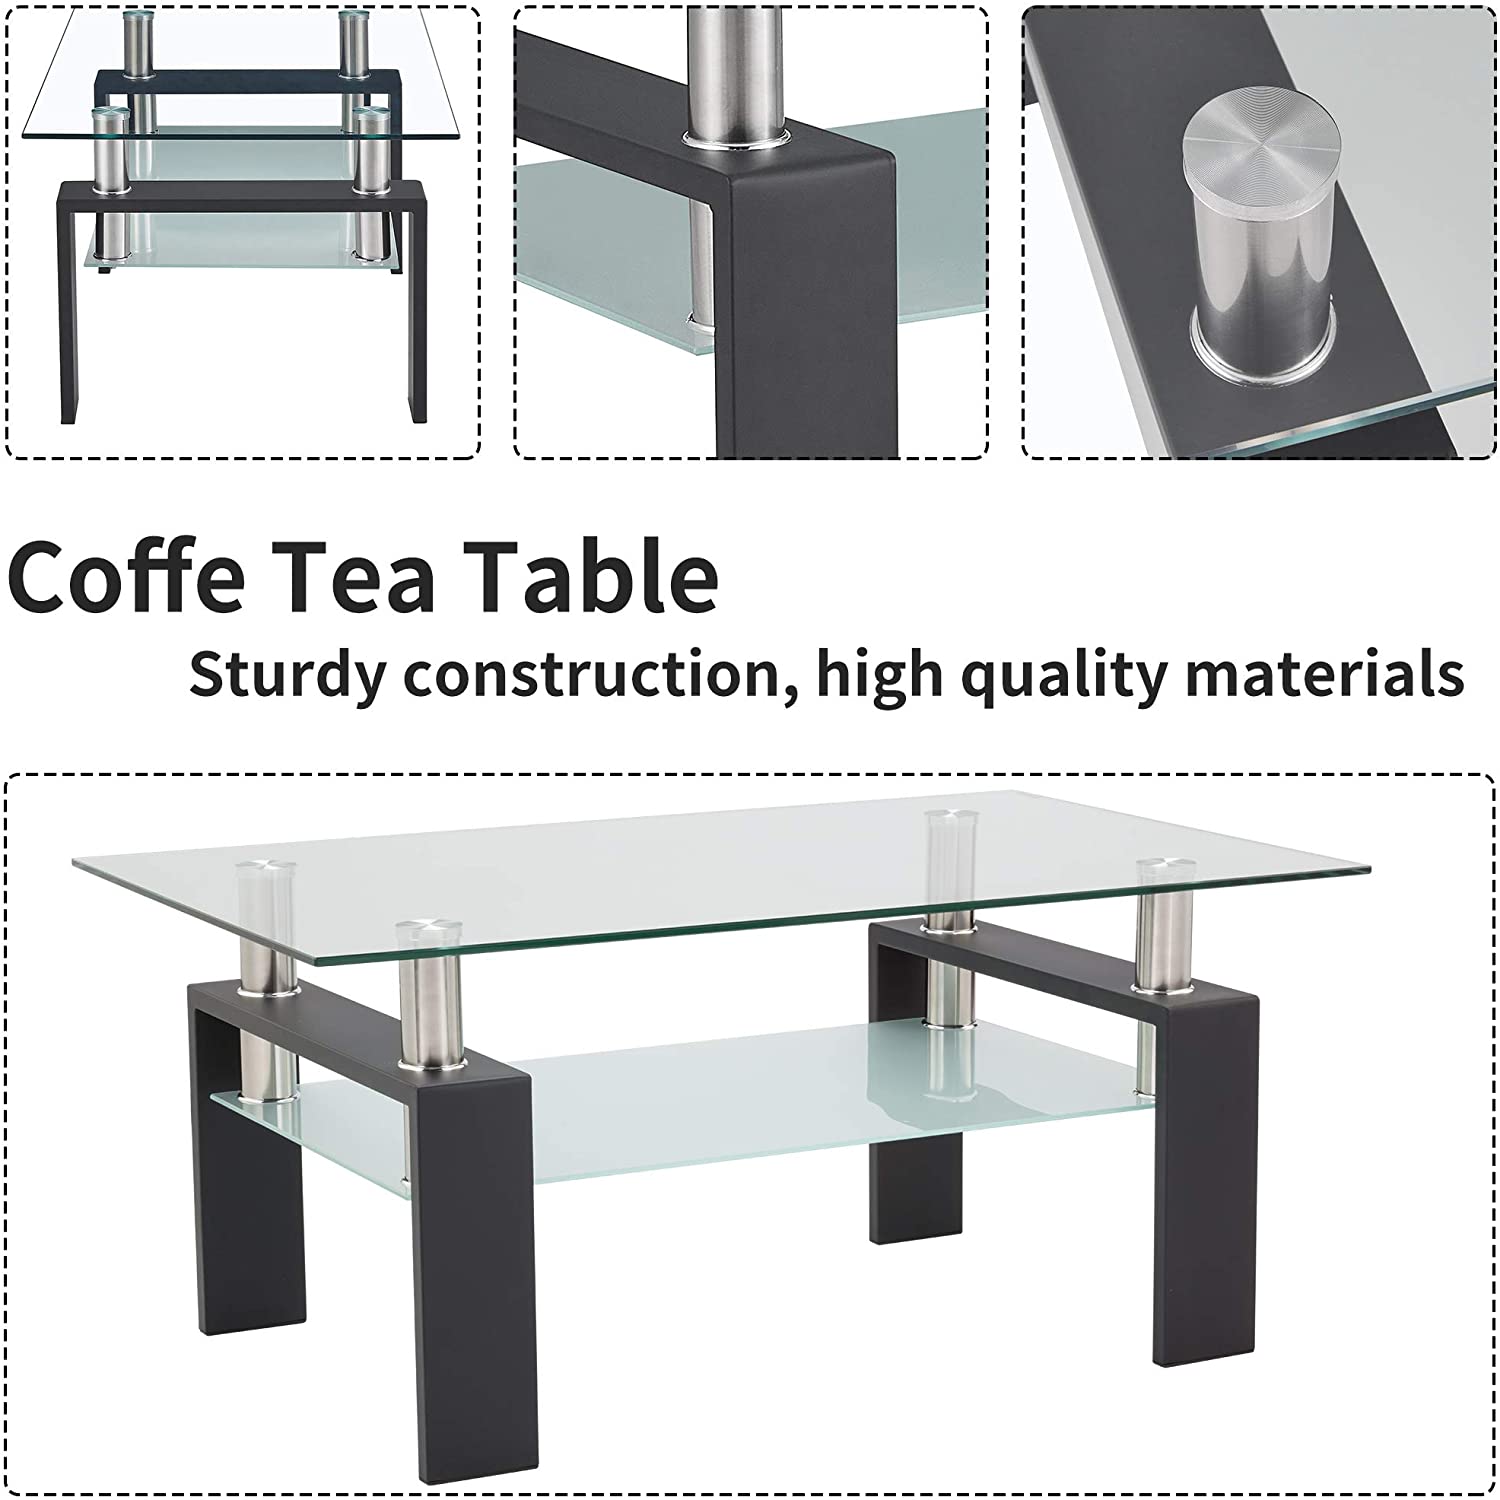 Glass Coffee Table with Lower Shelf, Clear Rectangle Glass Coffee Table, Modern Coffee Table with Metal Legs, Rectangle Center Table Sofa Table Home Furniture for Living Room, L5509 - image 3 of 9